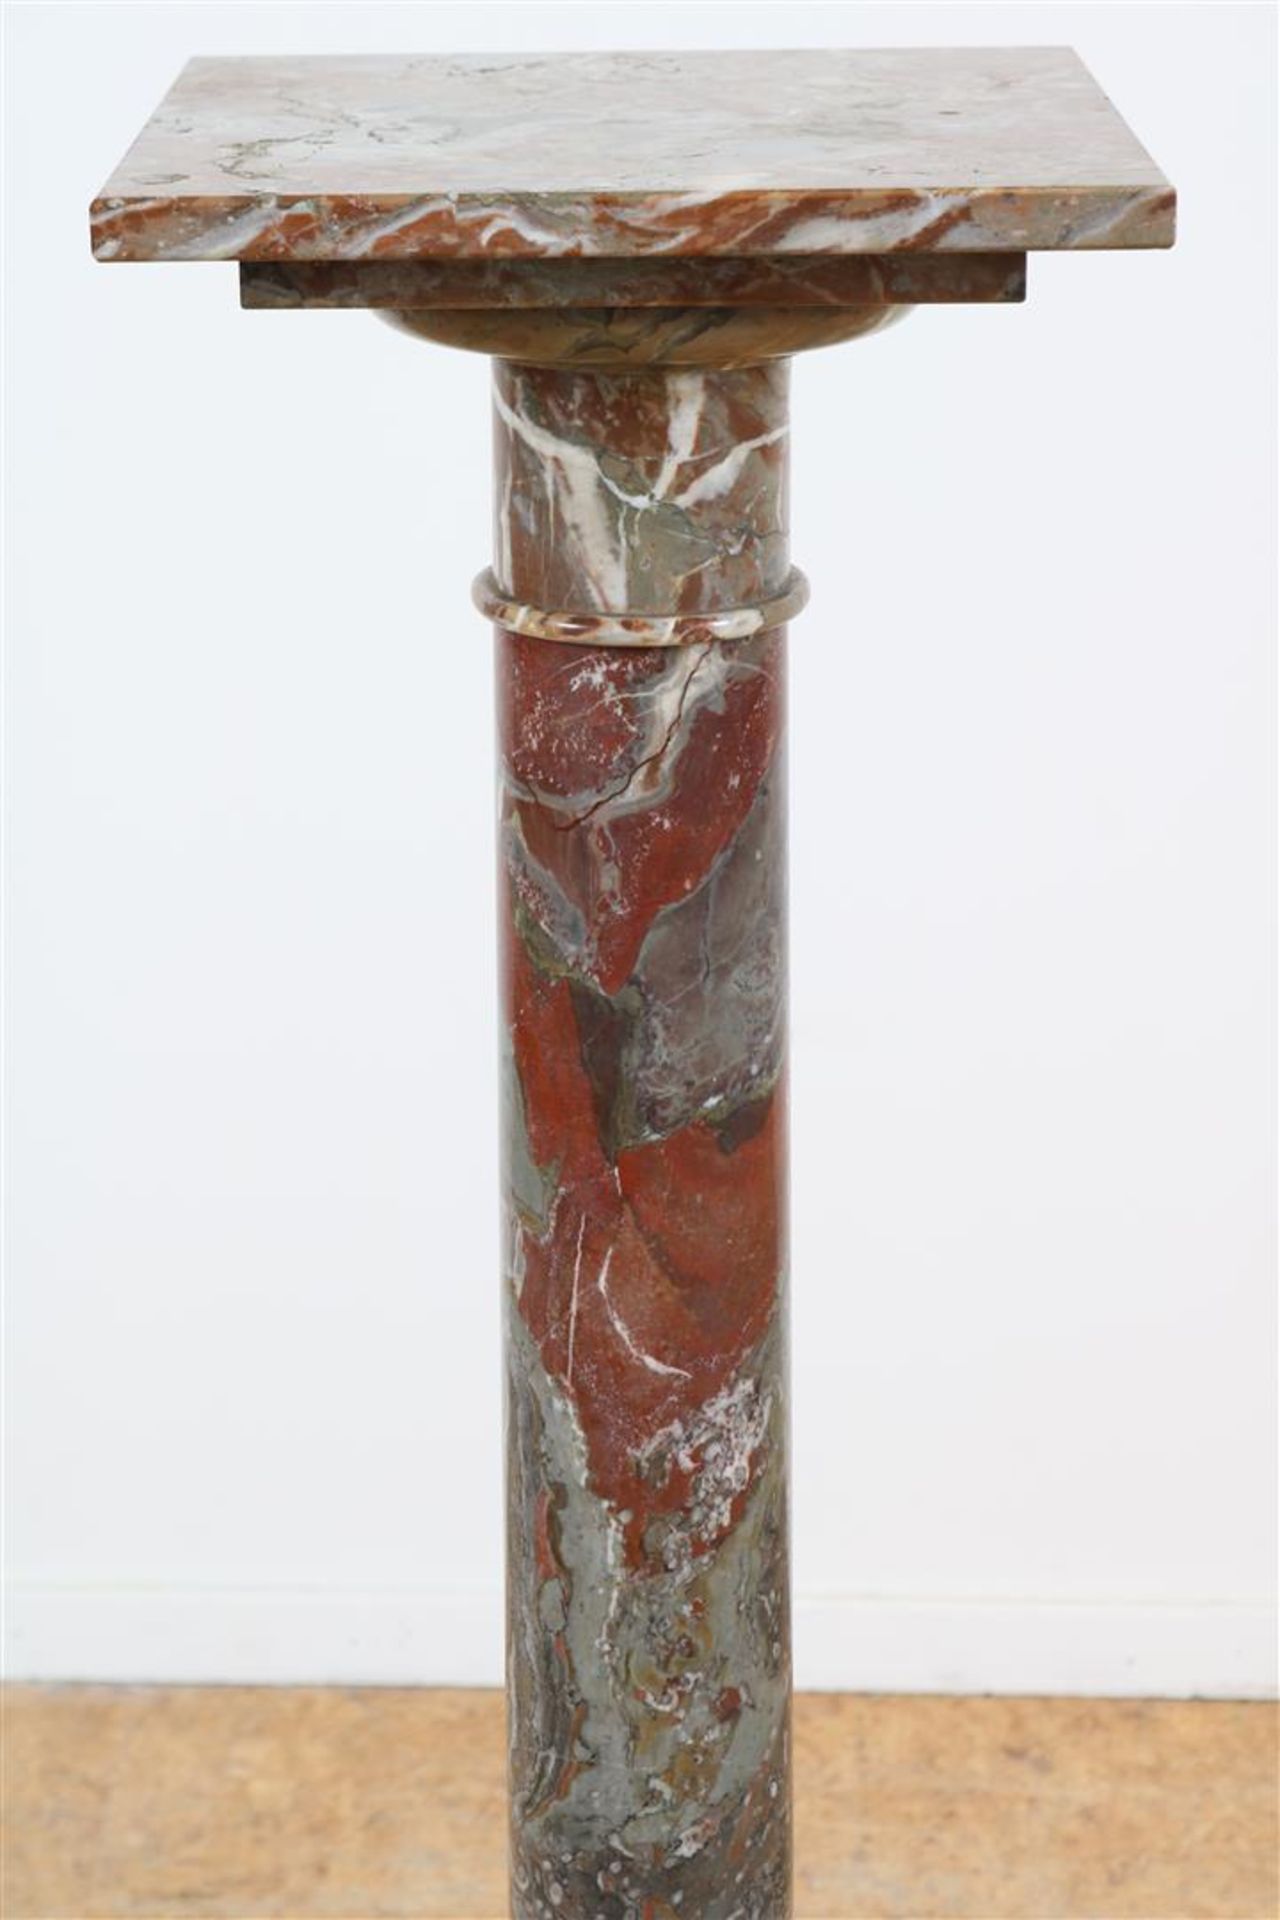 Red marble veined pedestals, with removable top, late 19th century, height 108 cm. - Image 3 of 5